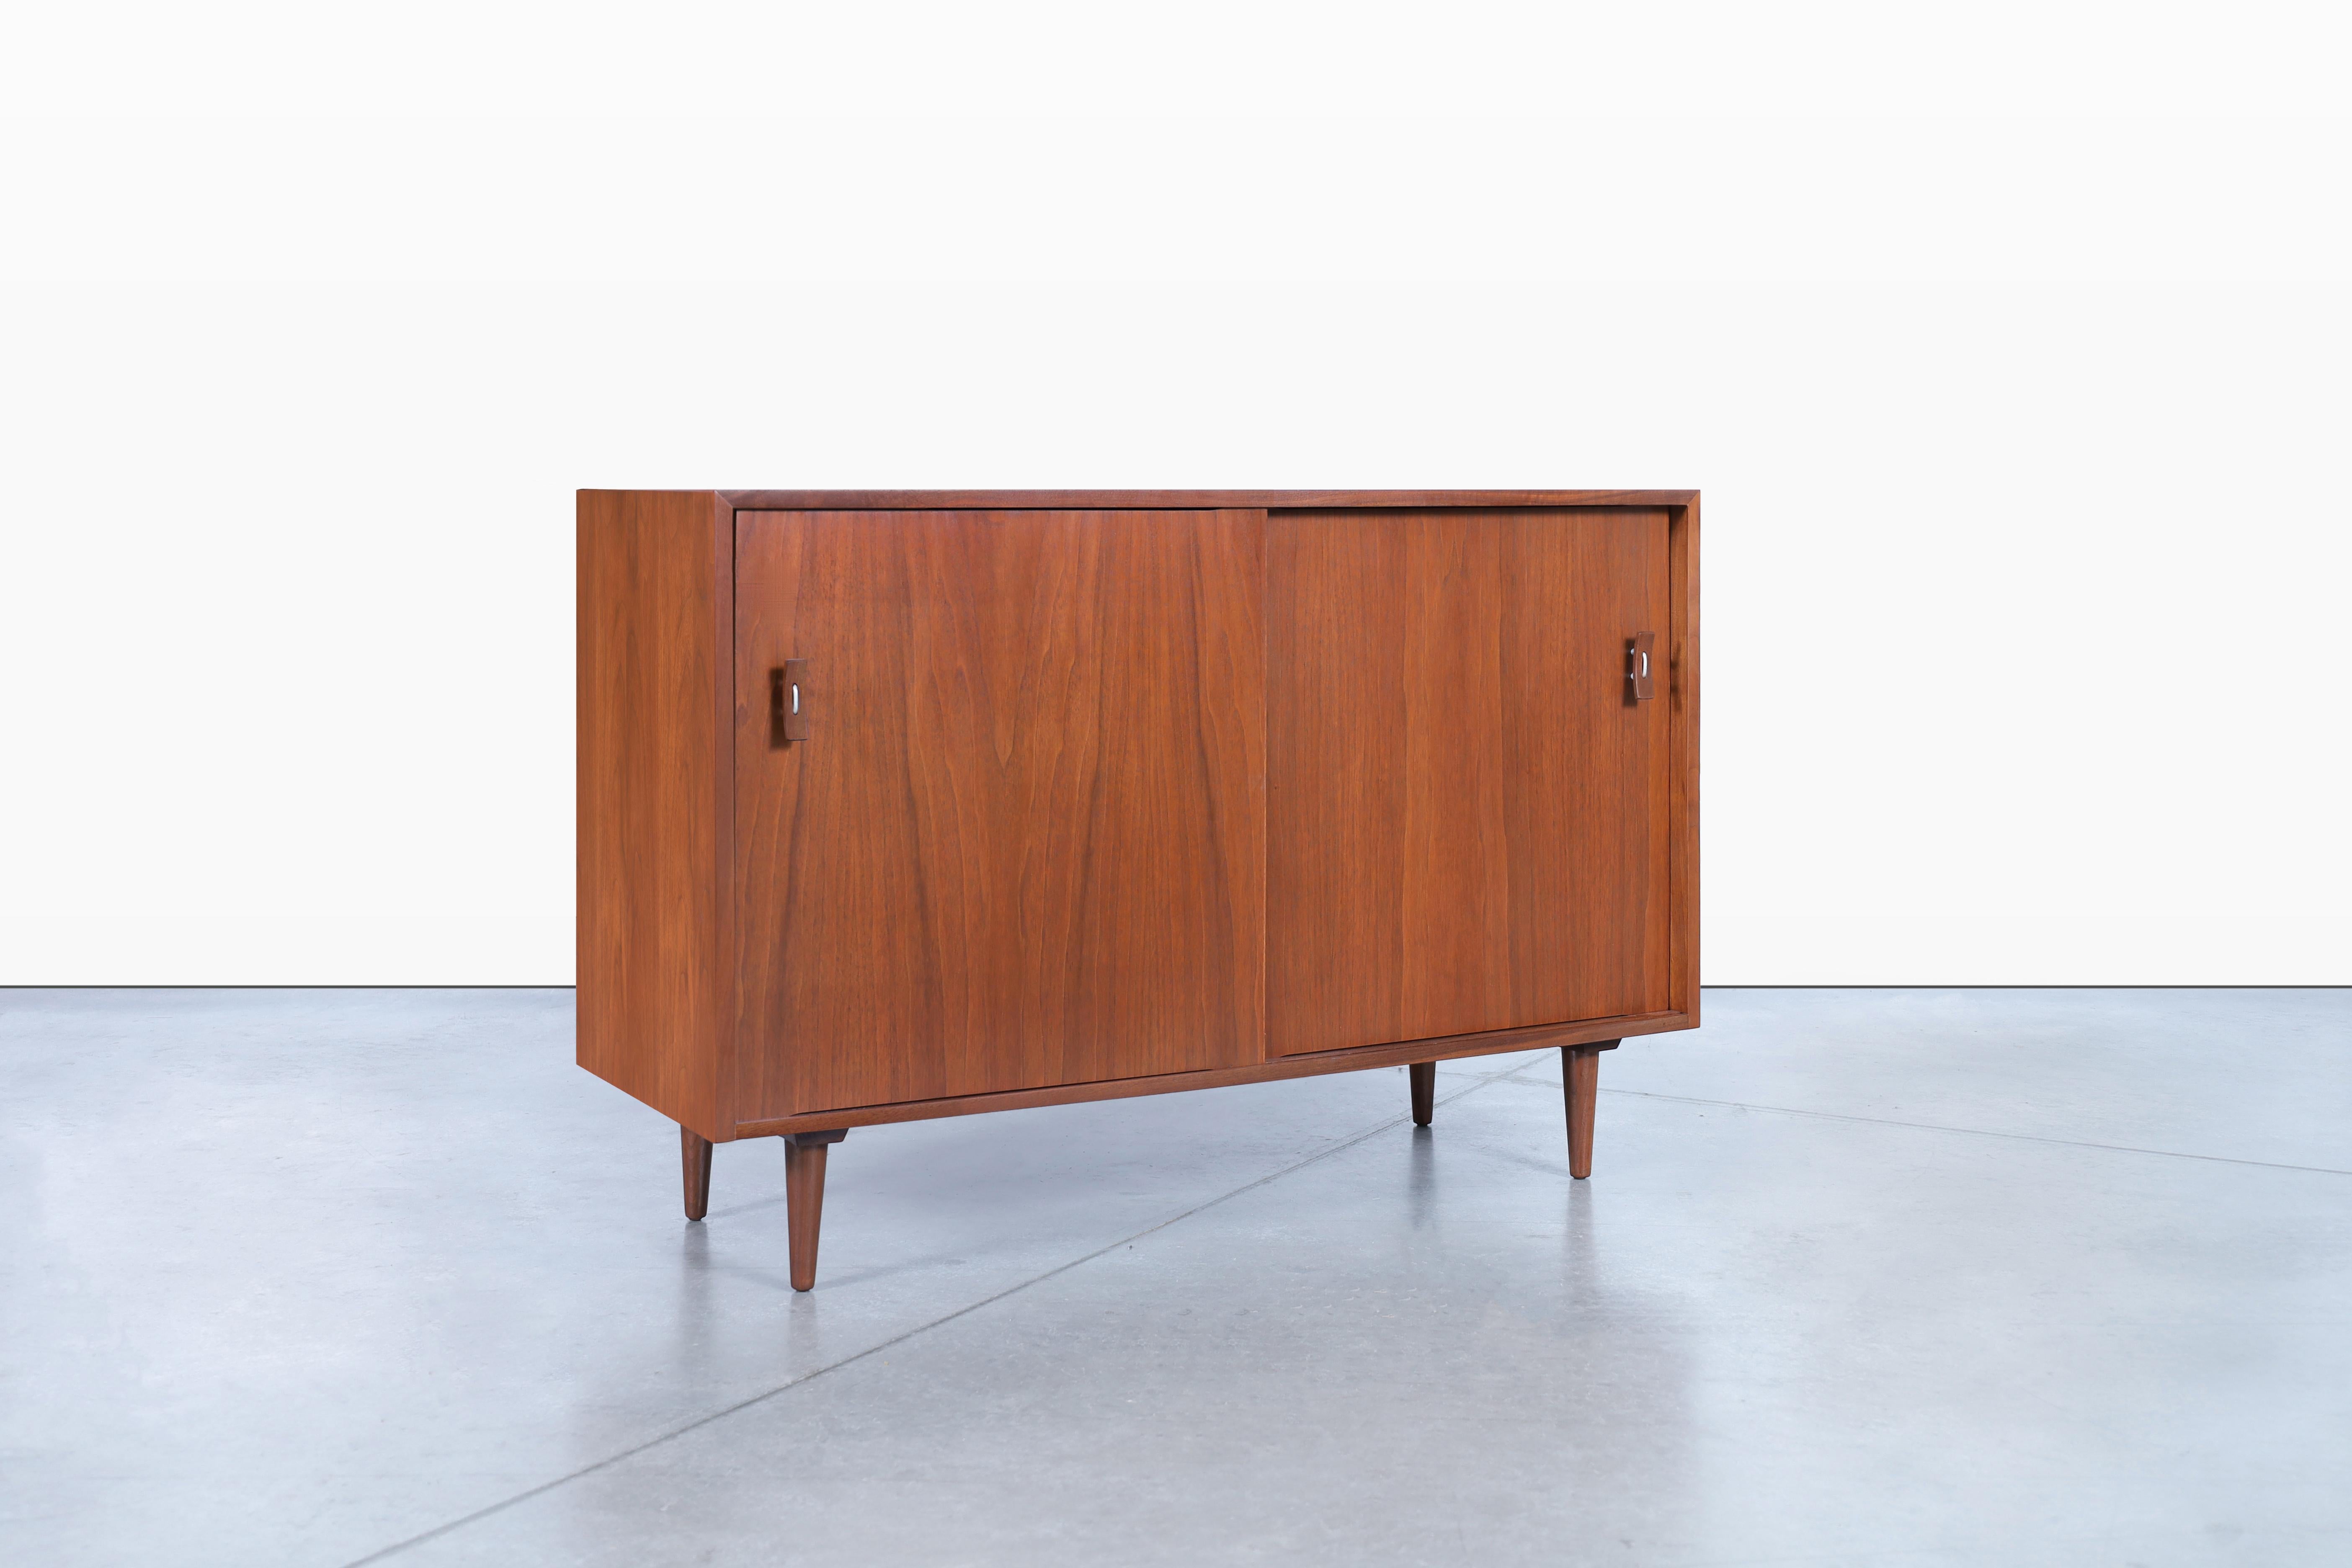 Beautiful vintage sideboard designed by Stanley Young for Glenn of California in the United States, circa 1950s. This stunning sideboard crafted from walnut showcase a beautiful grain detail that runs throughout its casing and sits on solid walnut